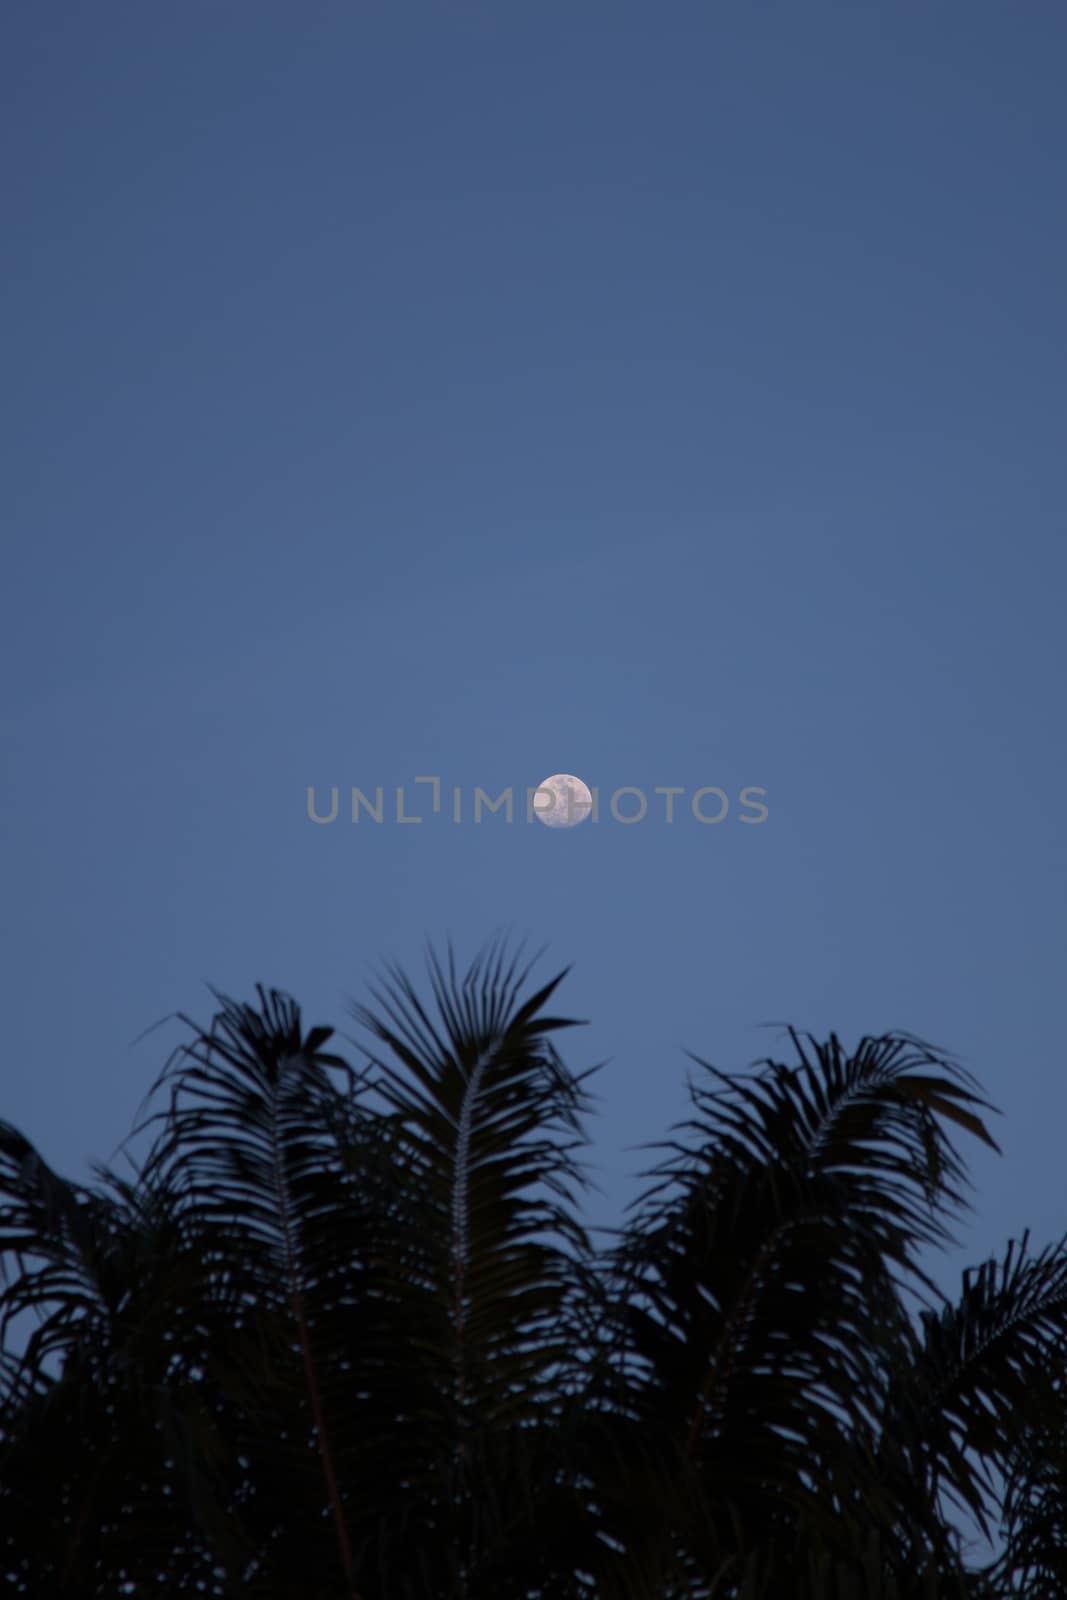 Full Moon above Coconut Tree by ngarare